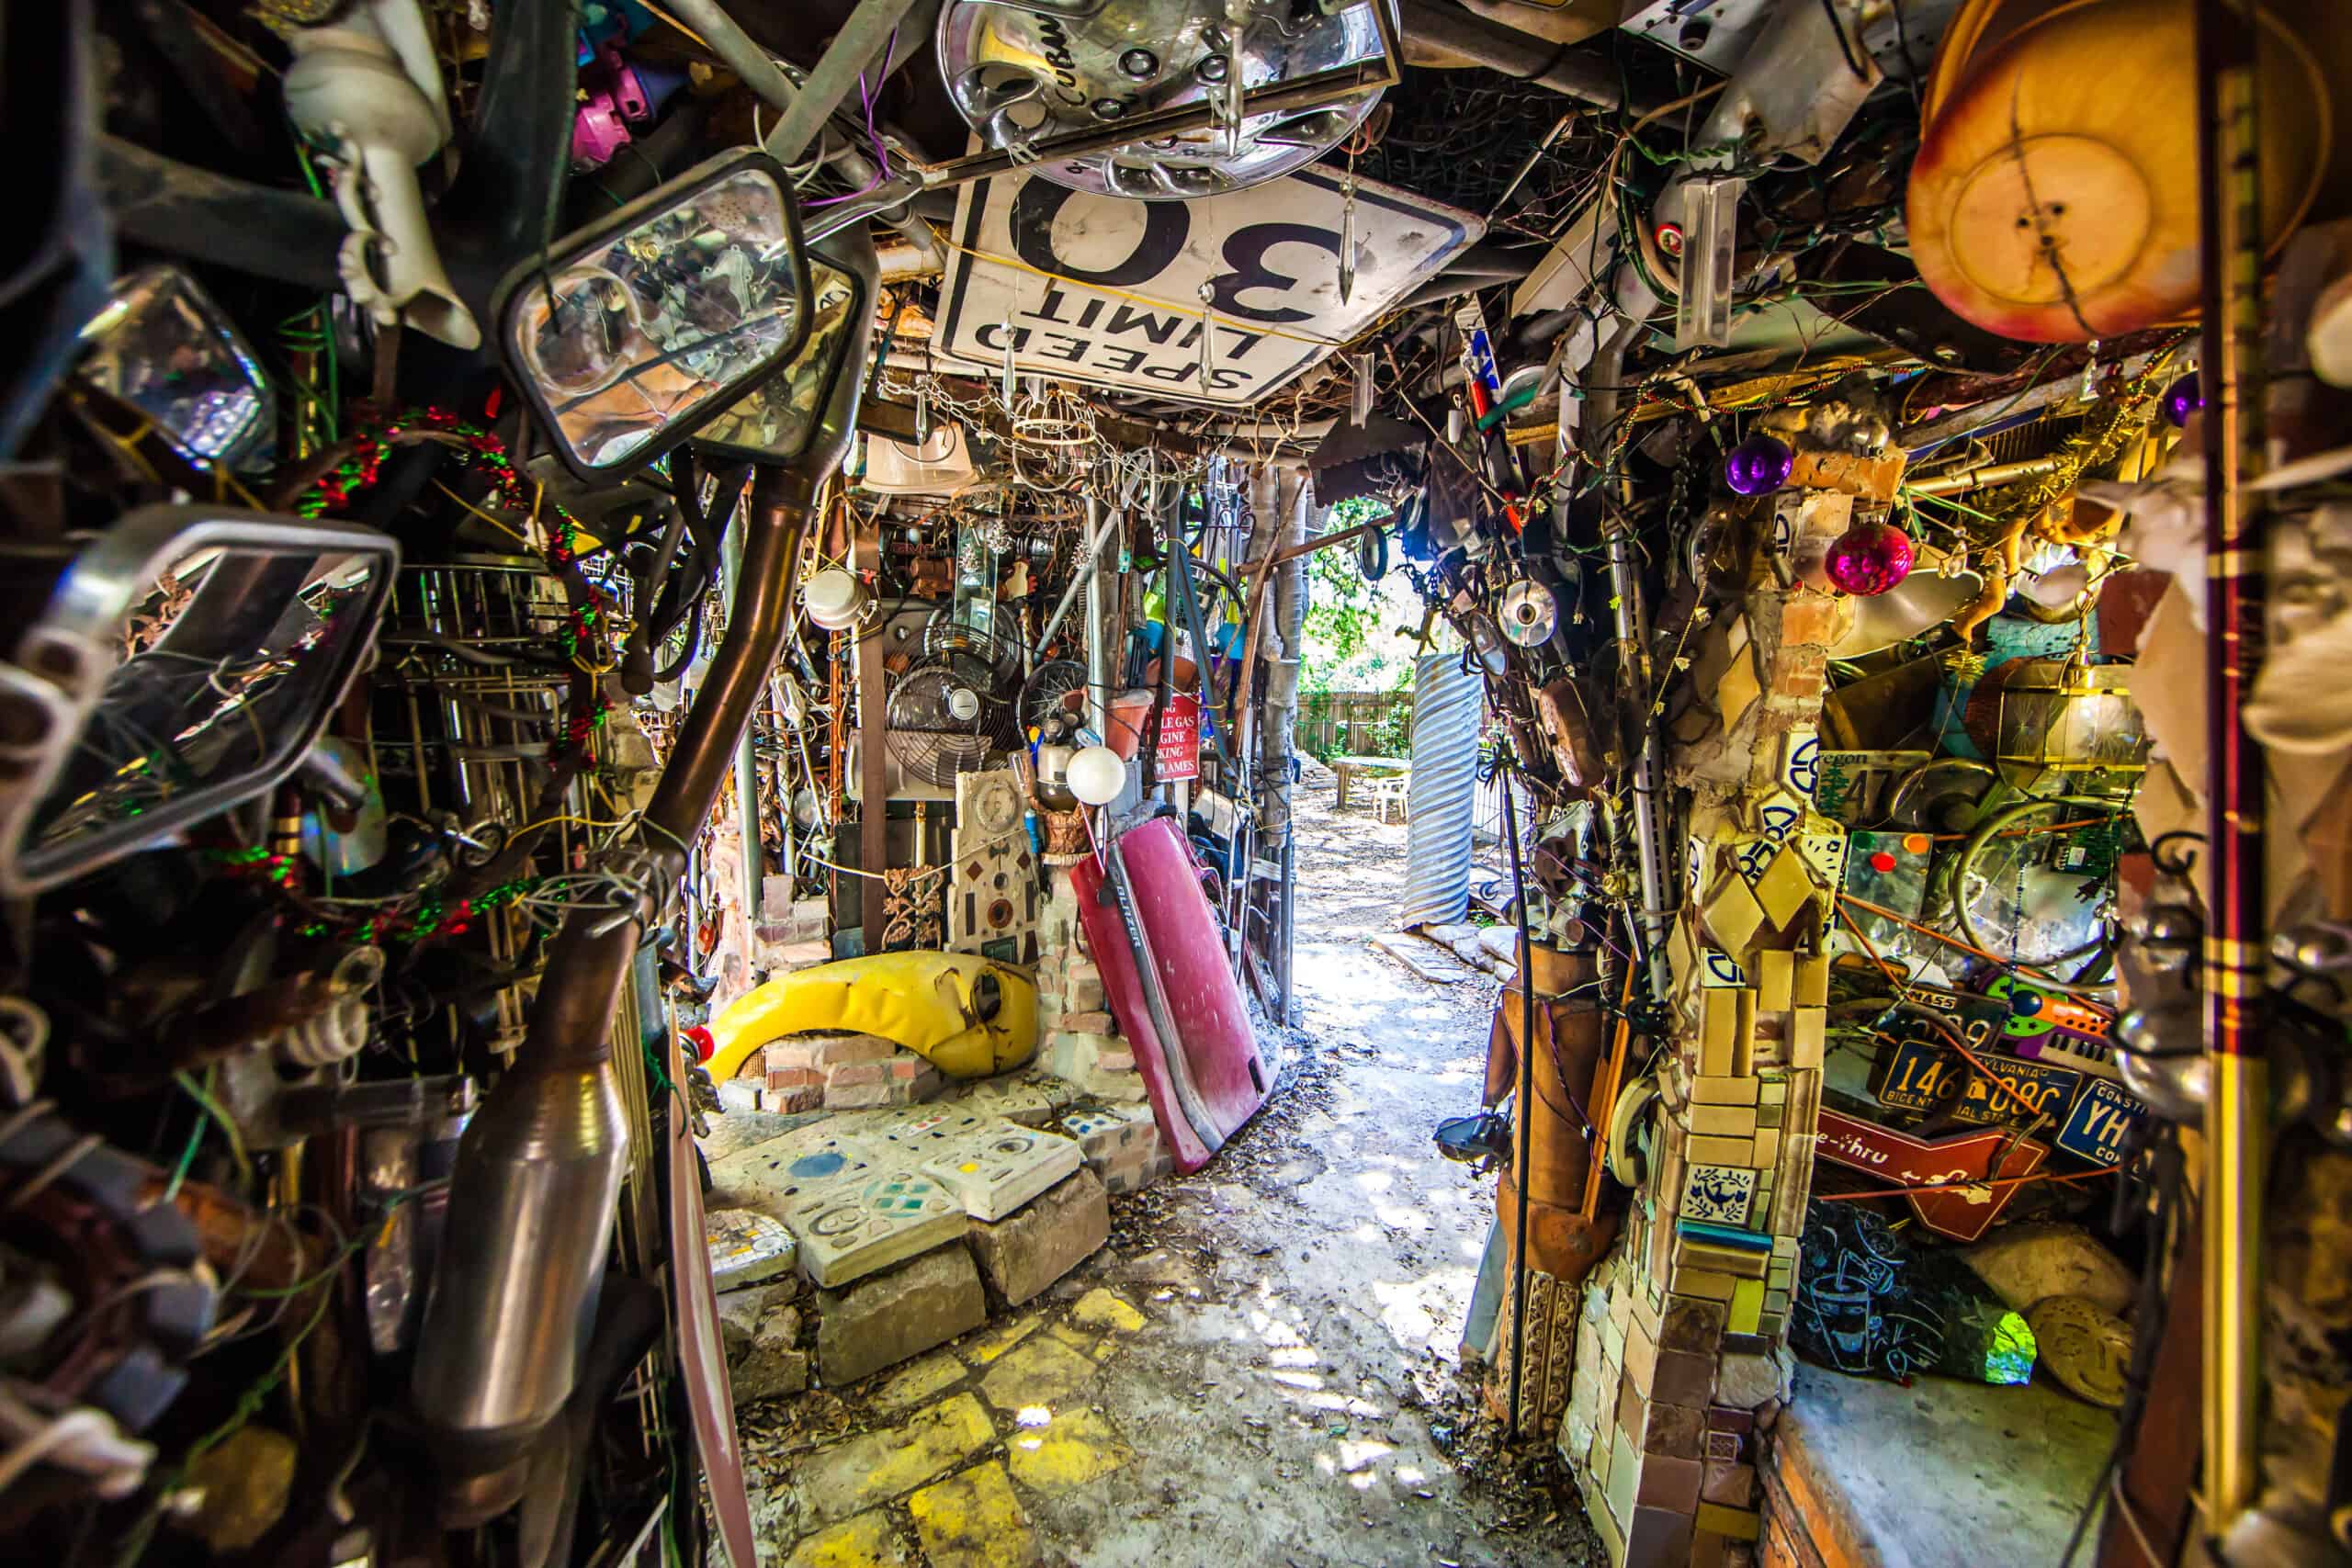 Cathedral of Junk in Austin, Texas